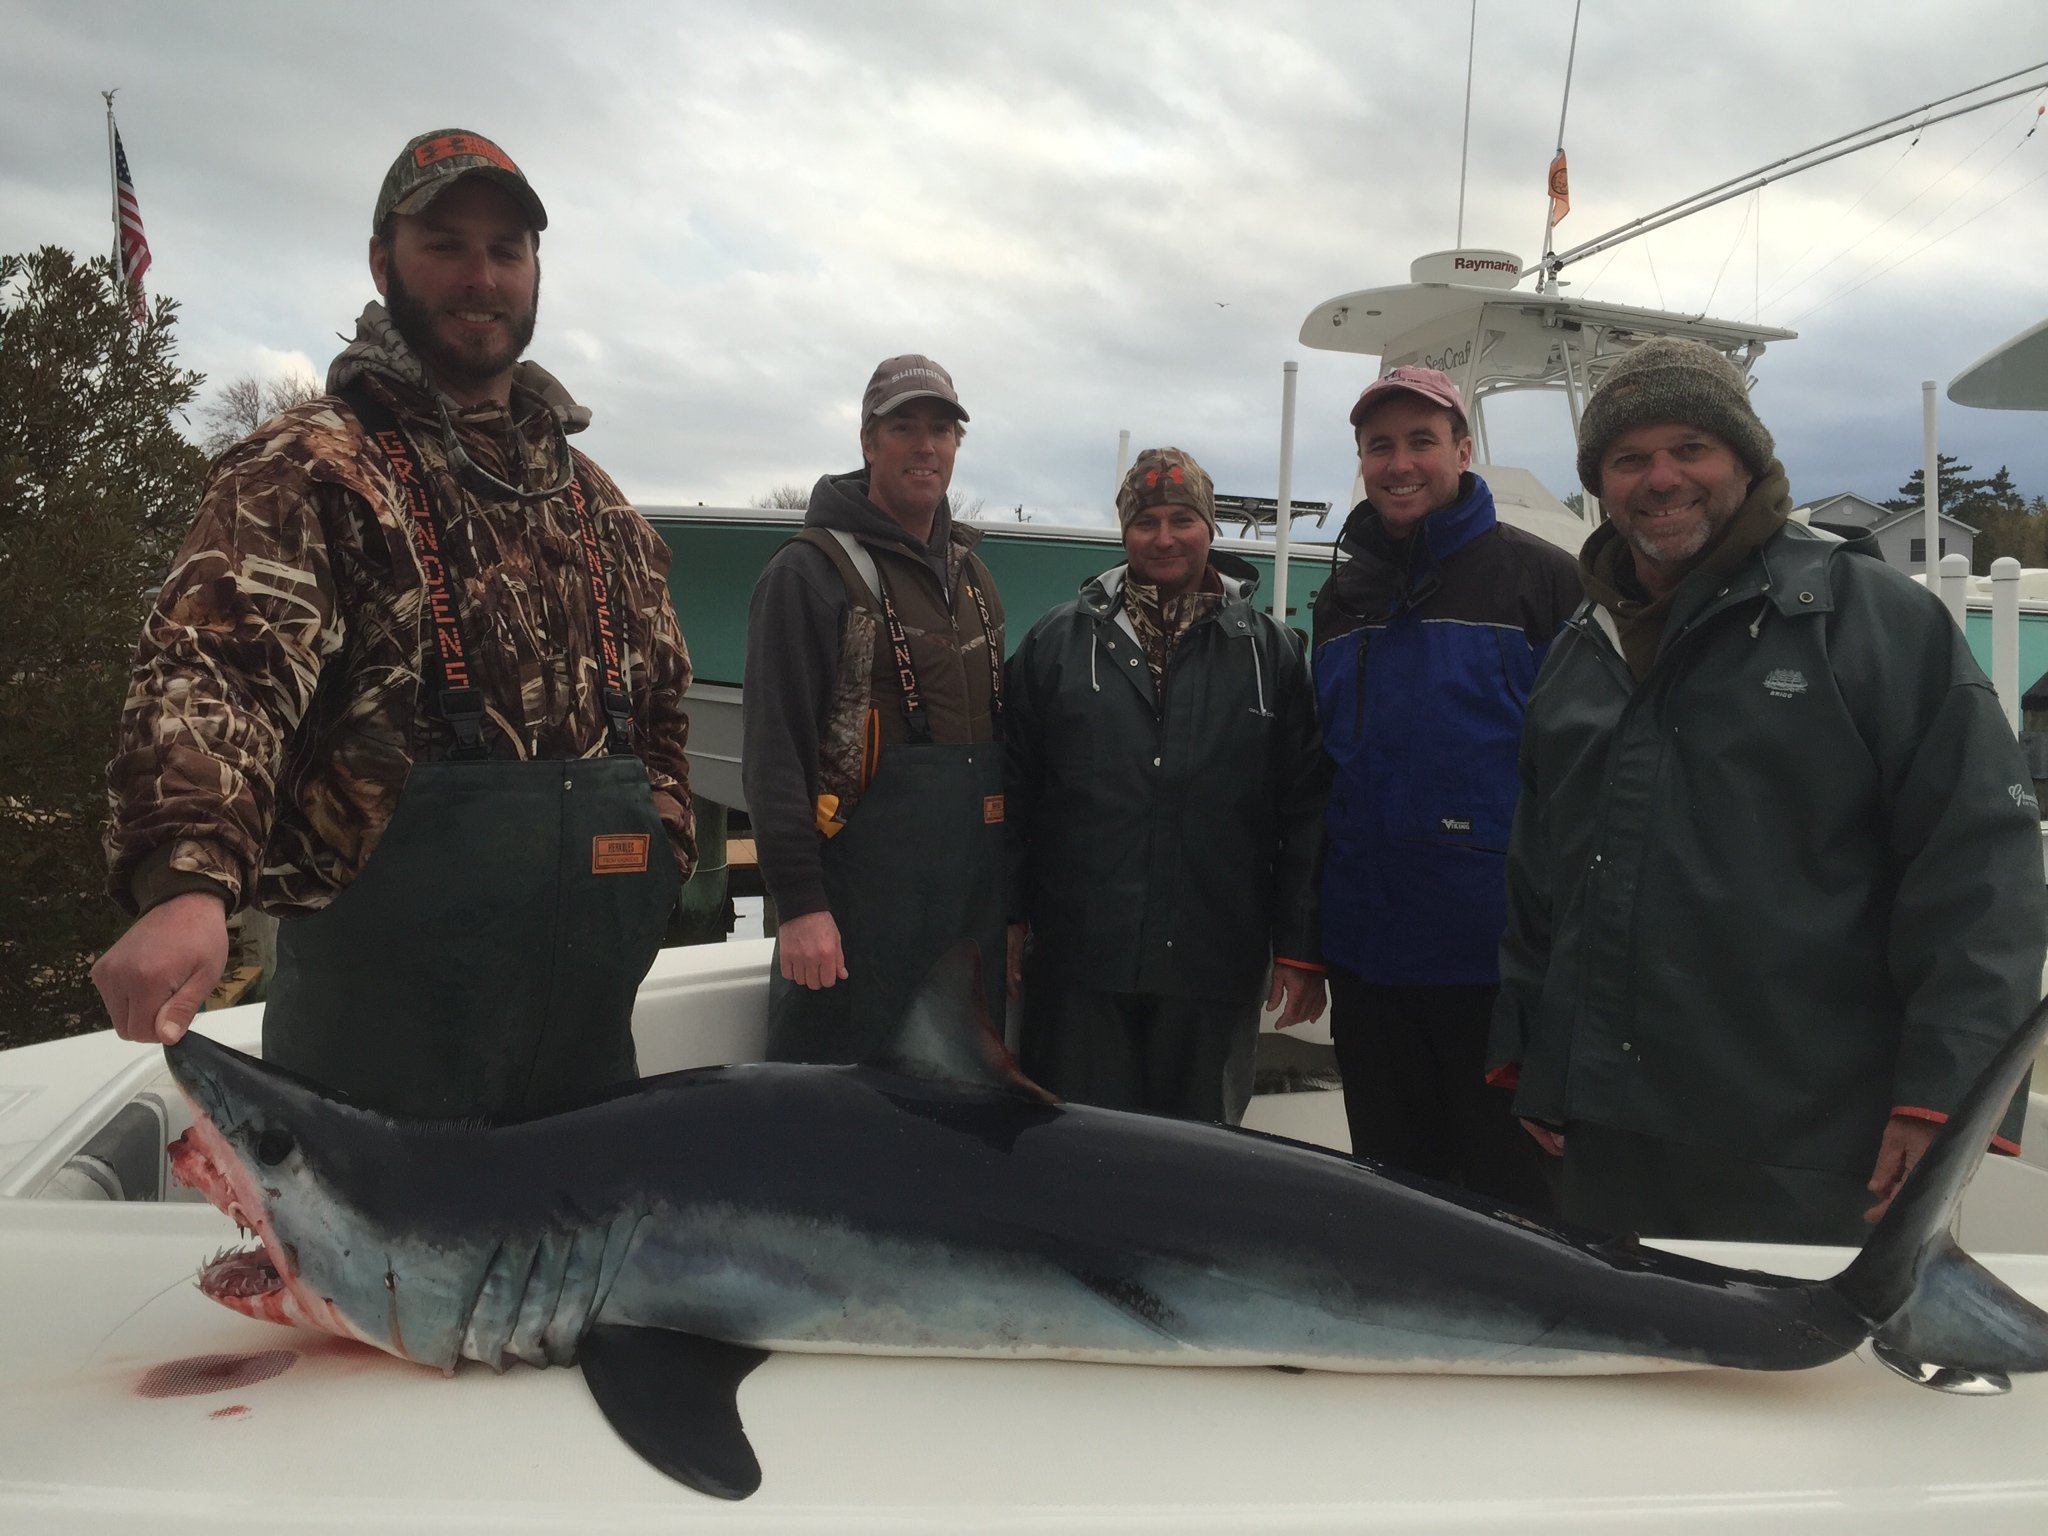 First Mako of the season in March!!